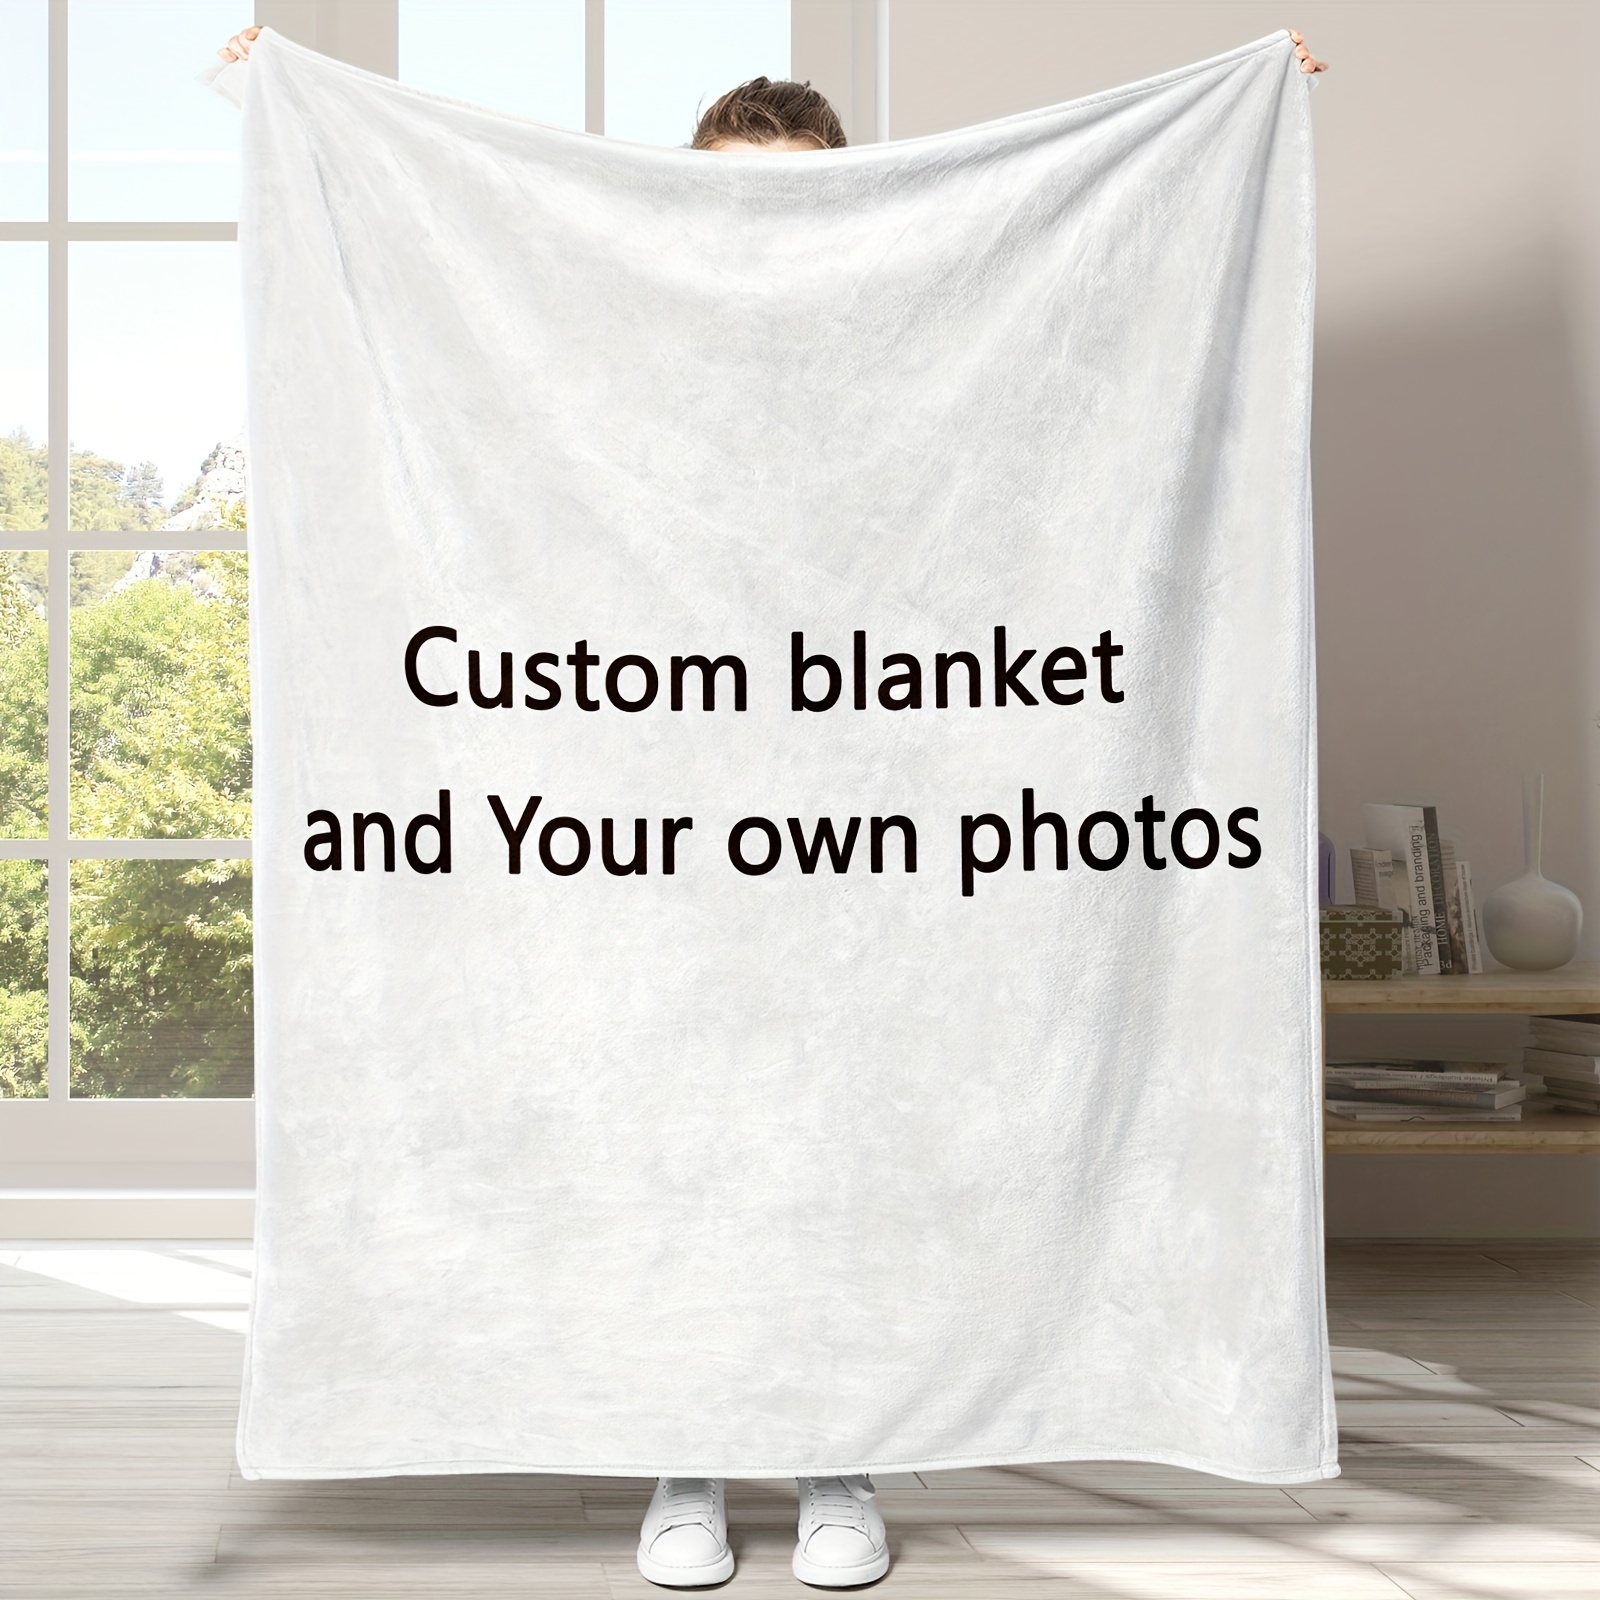 

1pc Personalized Custom Photo Blanket, Suitable For Sleeping, Camping, Travel Ideal Choice -for Unique Gifts For Family Members, Friends And Loved Ones